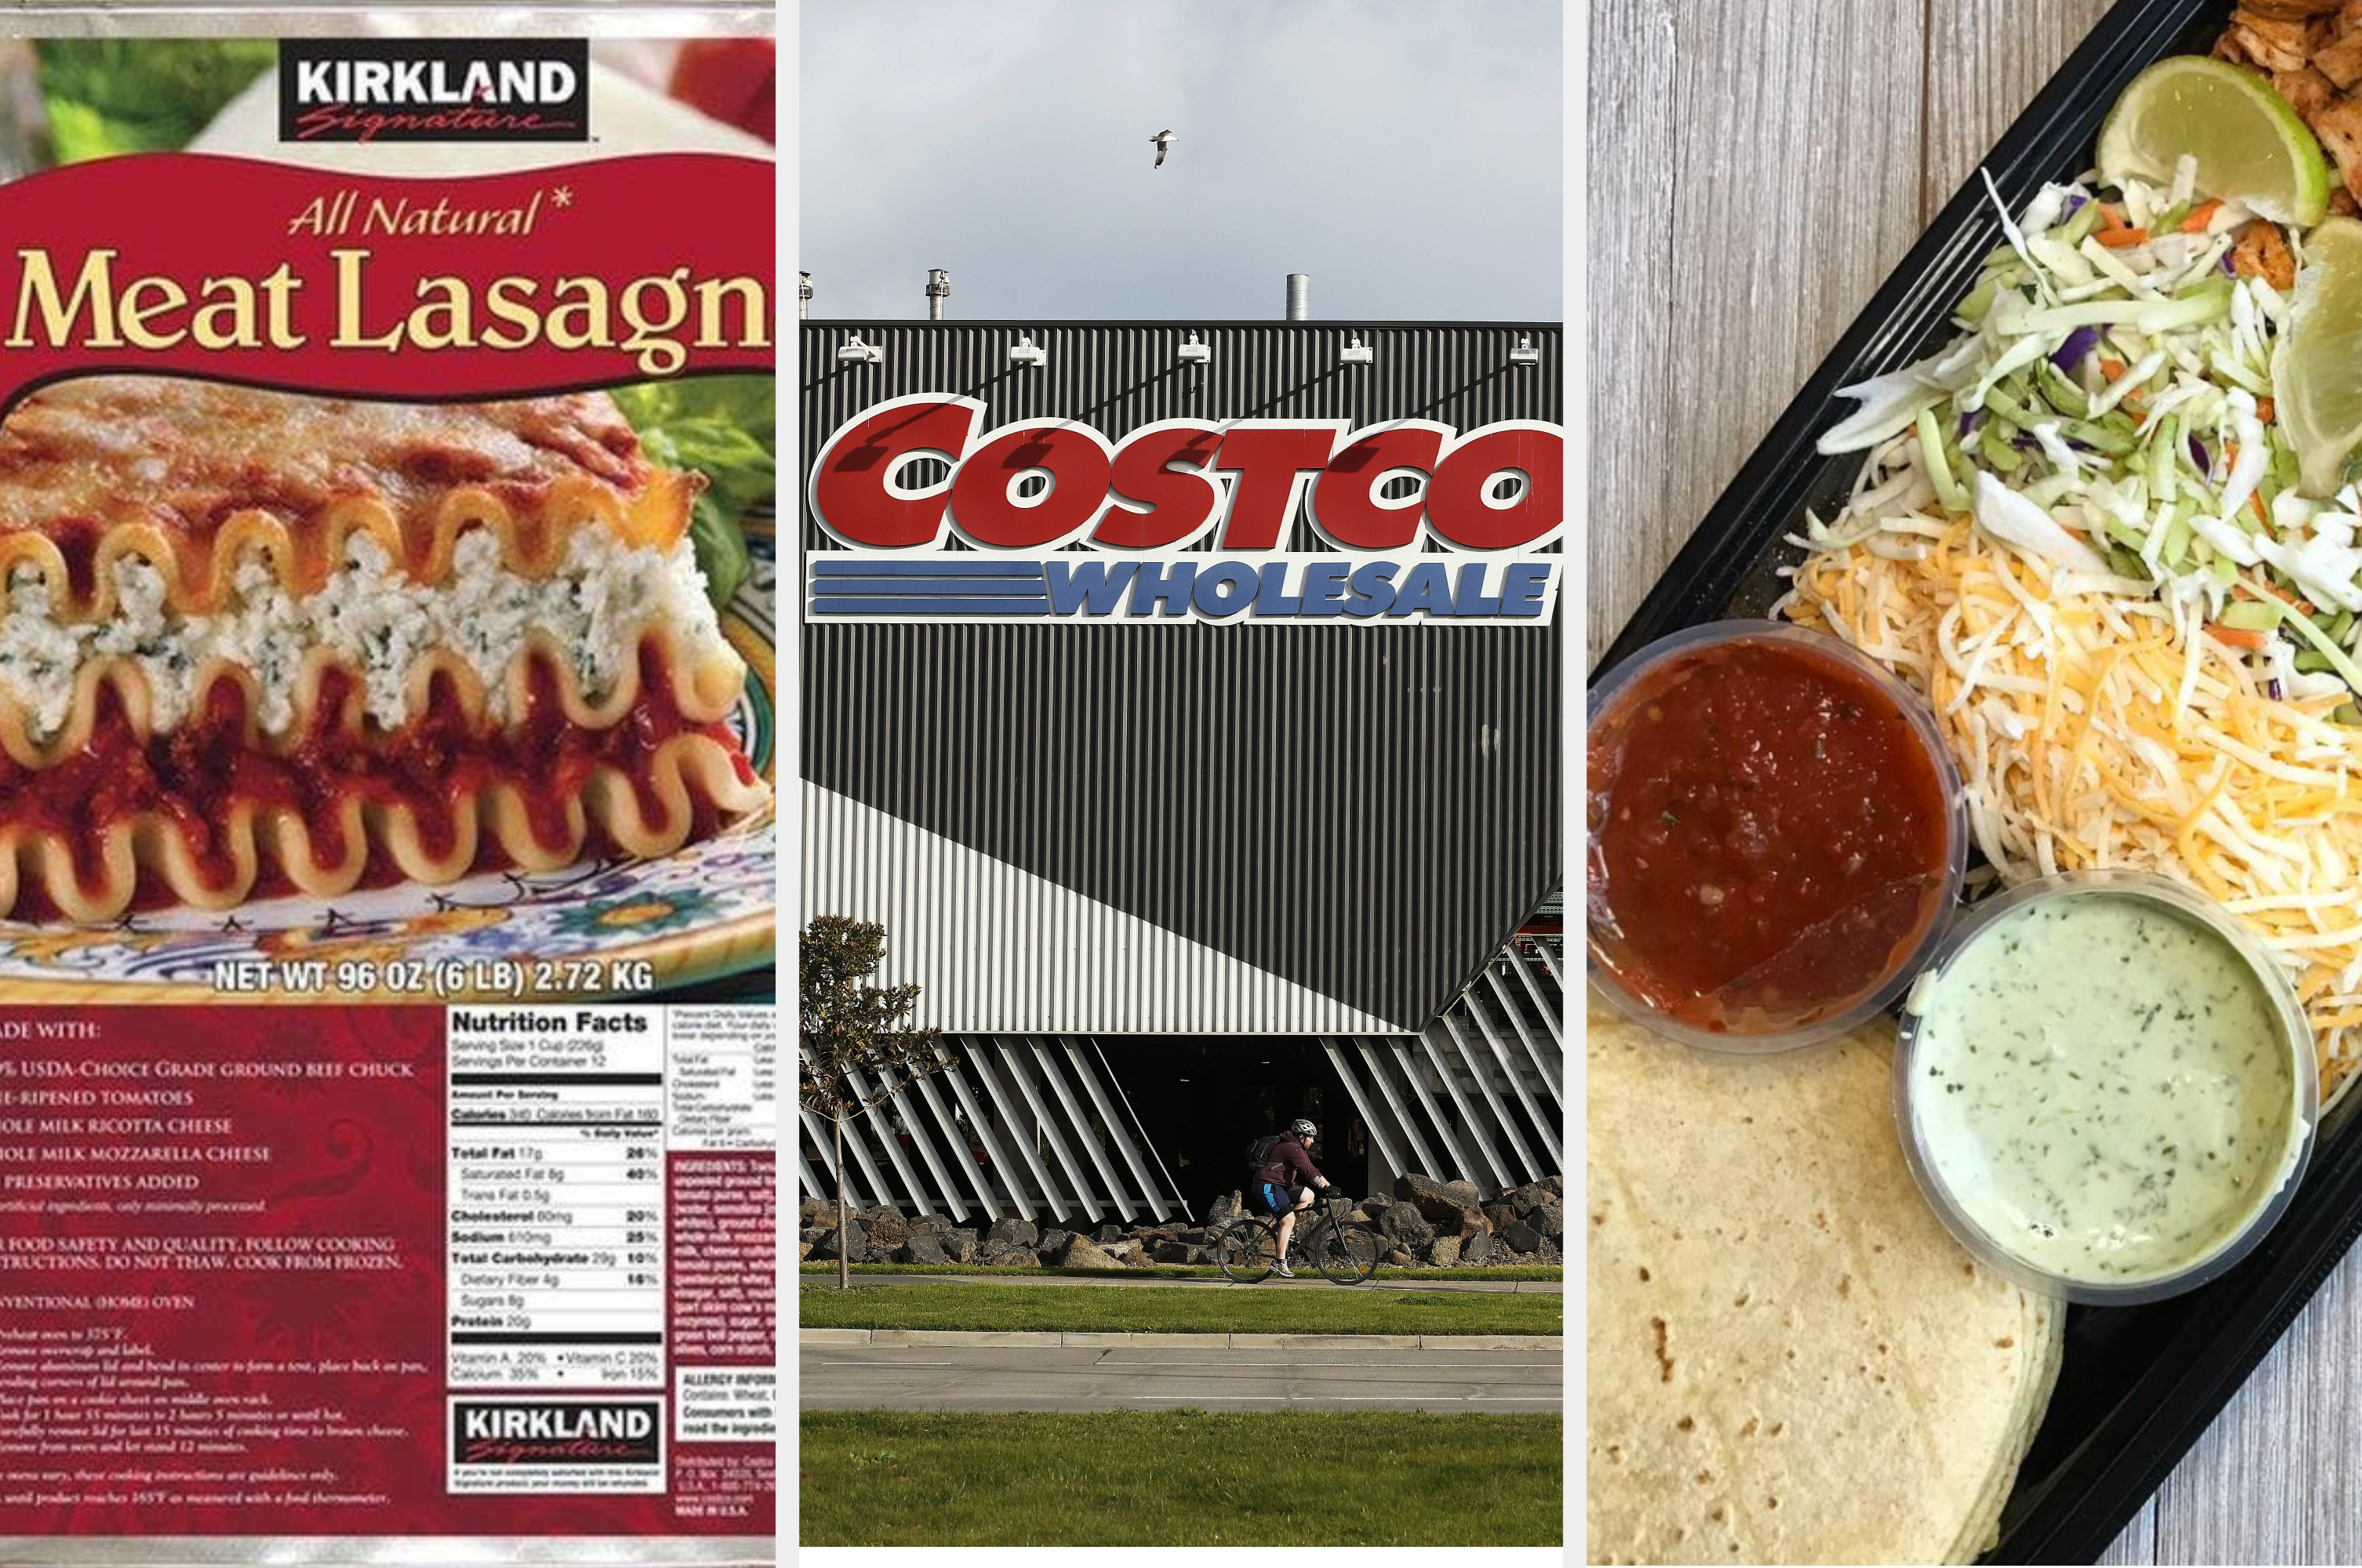 Costco Prepared Meals That Will Feed Your Family Within Minutes